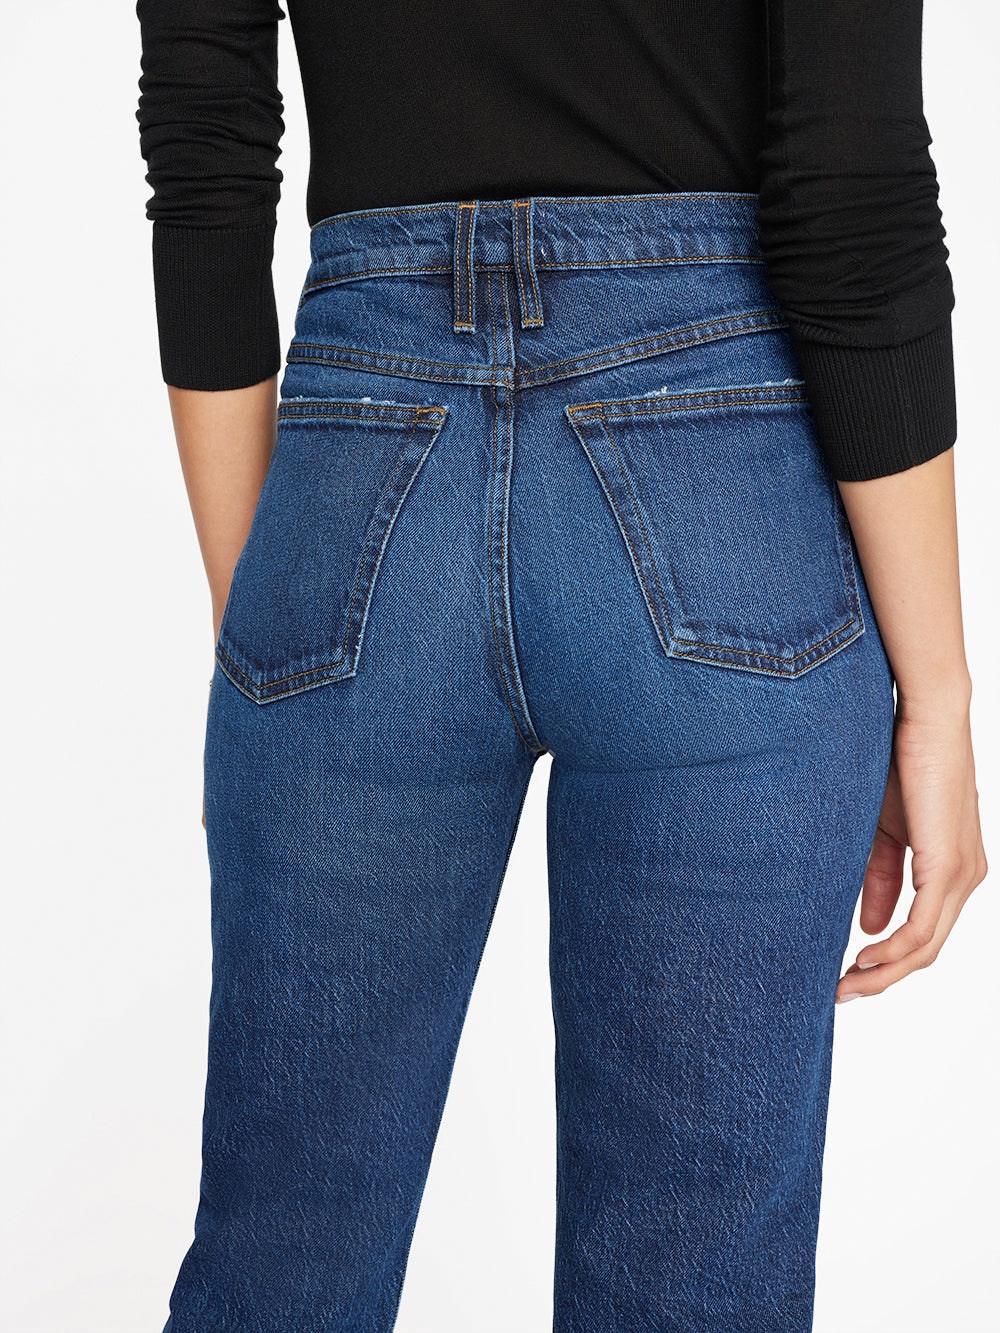 The back view of a woman in Frame Le High 'N' Tight Straight - Hallam denim jeans.